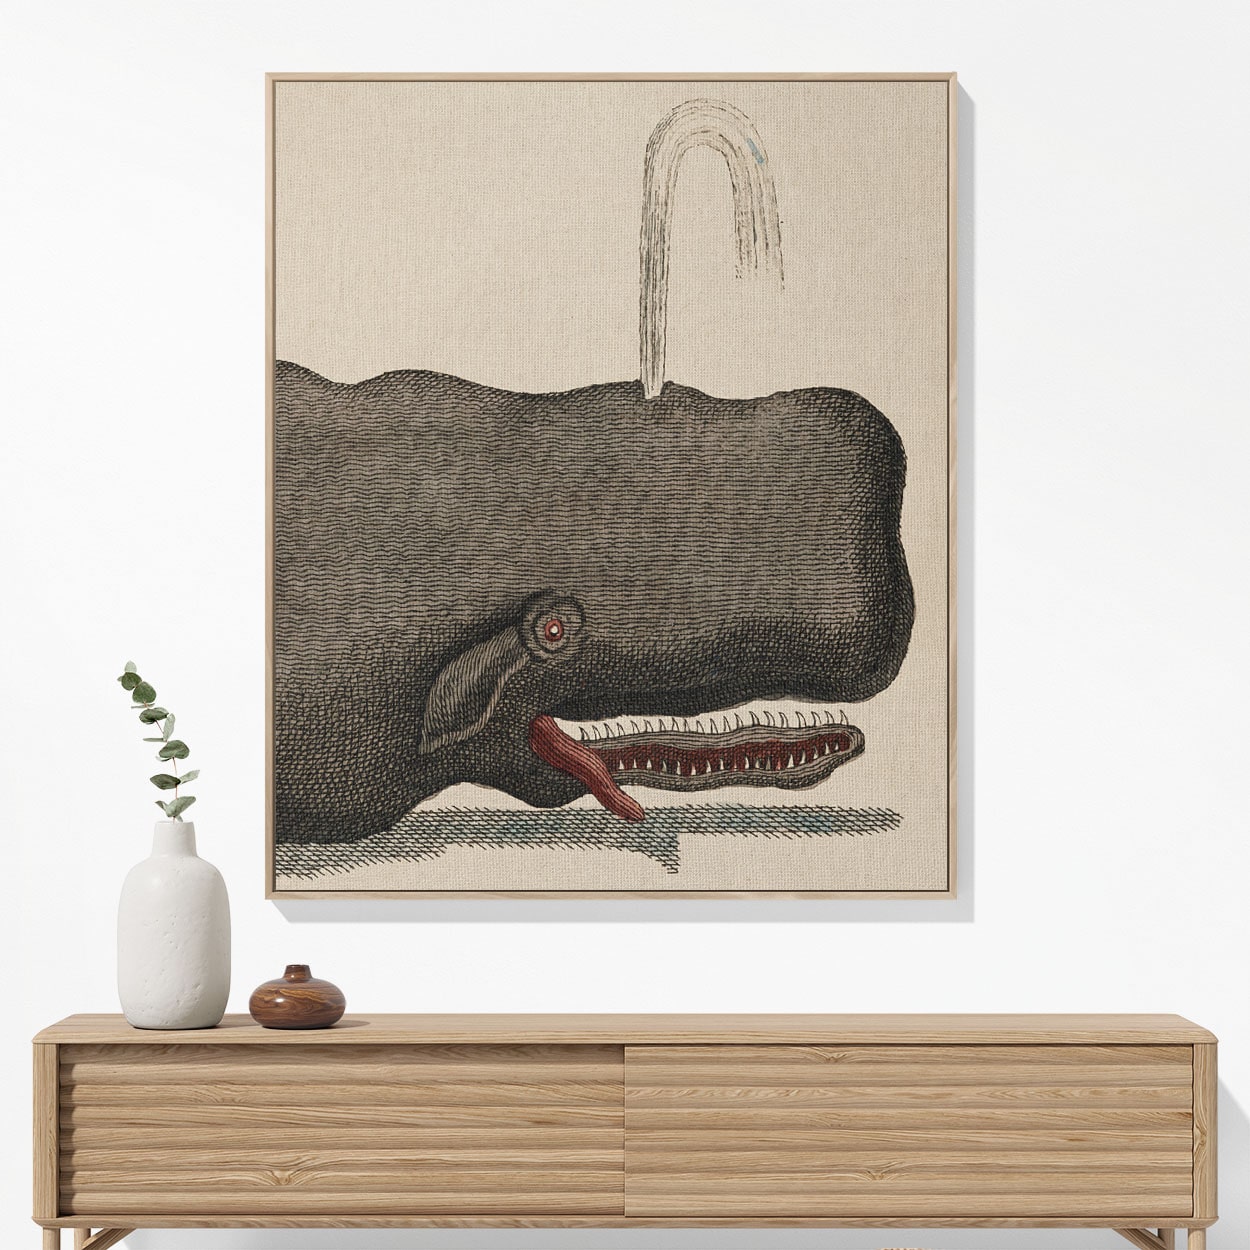 Funny Whale Woven Blanket Woven Blanket Hanging on a Wall as Framed Wall Art